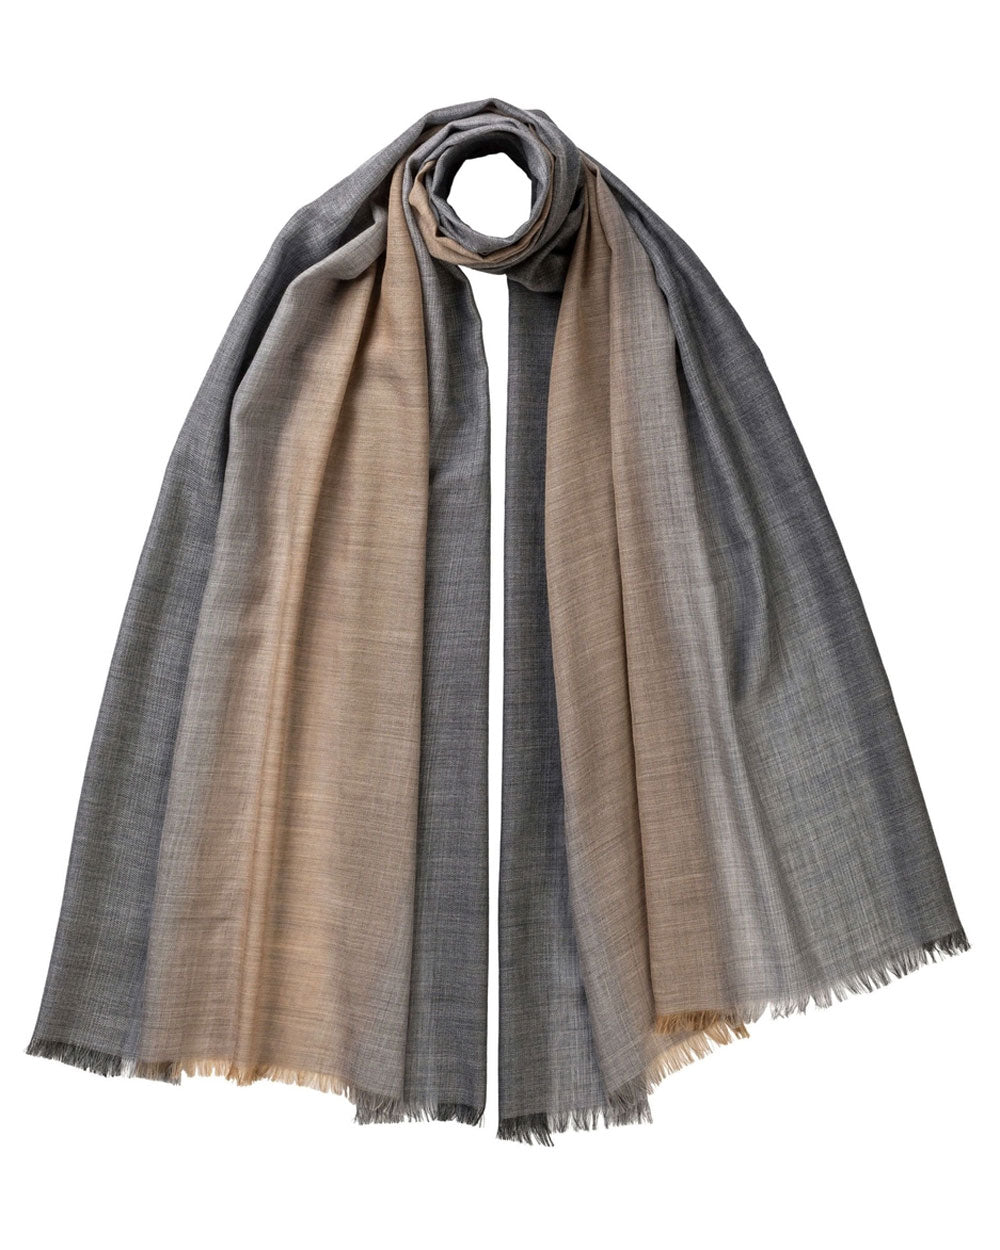 Cashmere Vertical Ombre Scarf in Camel